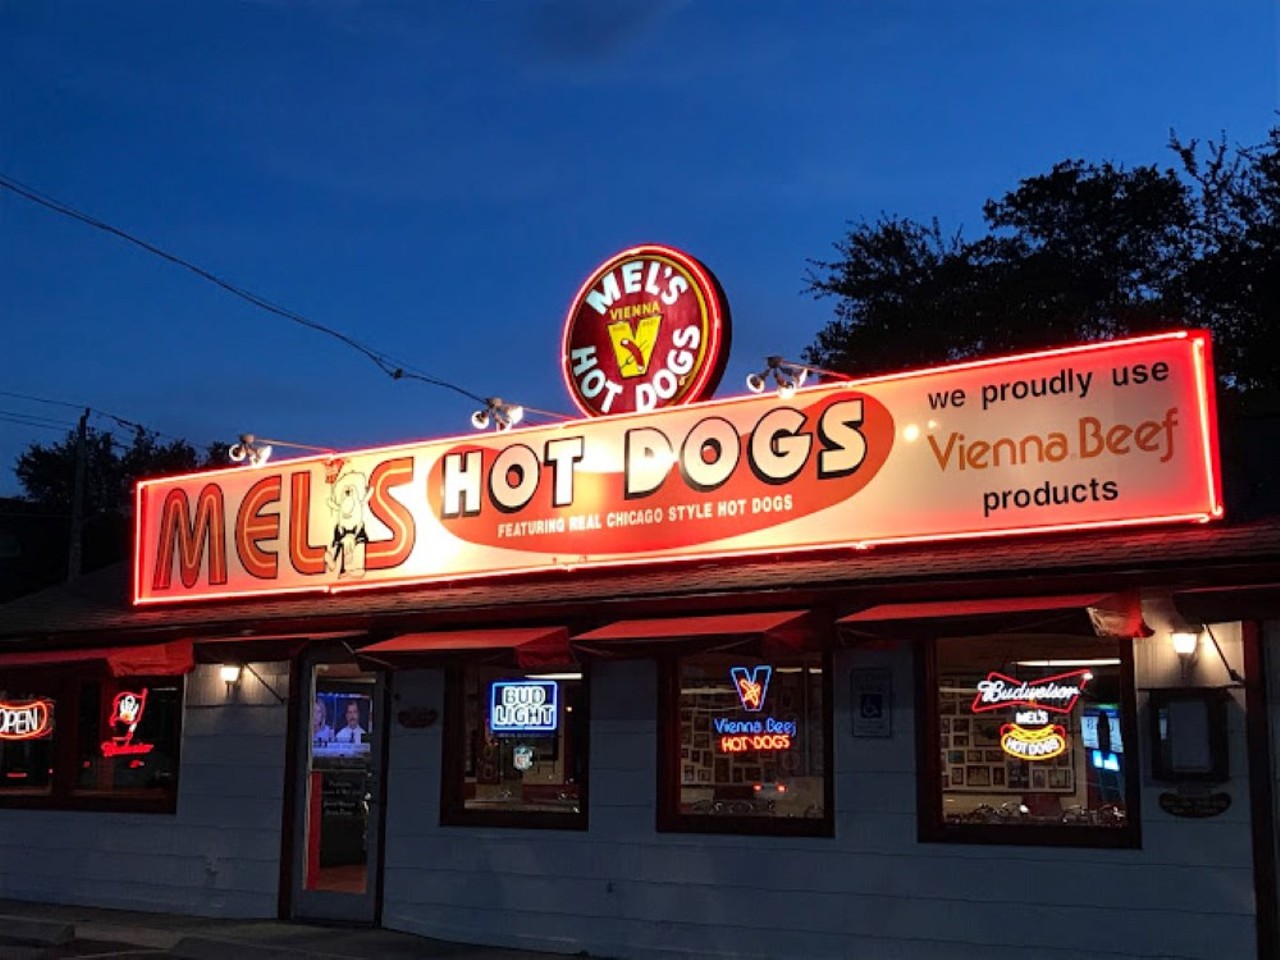 Mel’s Hot Dogs
4136 E Busch Blvd., Tampa, 813-985-8000
Easily, one of the best places to get a glizzy in the Bay, Mel’s has been serving up Vienna beef dogs since 1973 (that’s 50 years!), and is known for its Chicago-style hot dogs served on a steamed poppy seed bun with all the fixins’. 
Photo via Google Maps